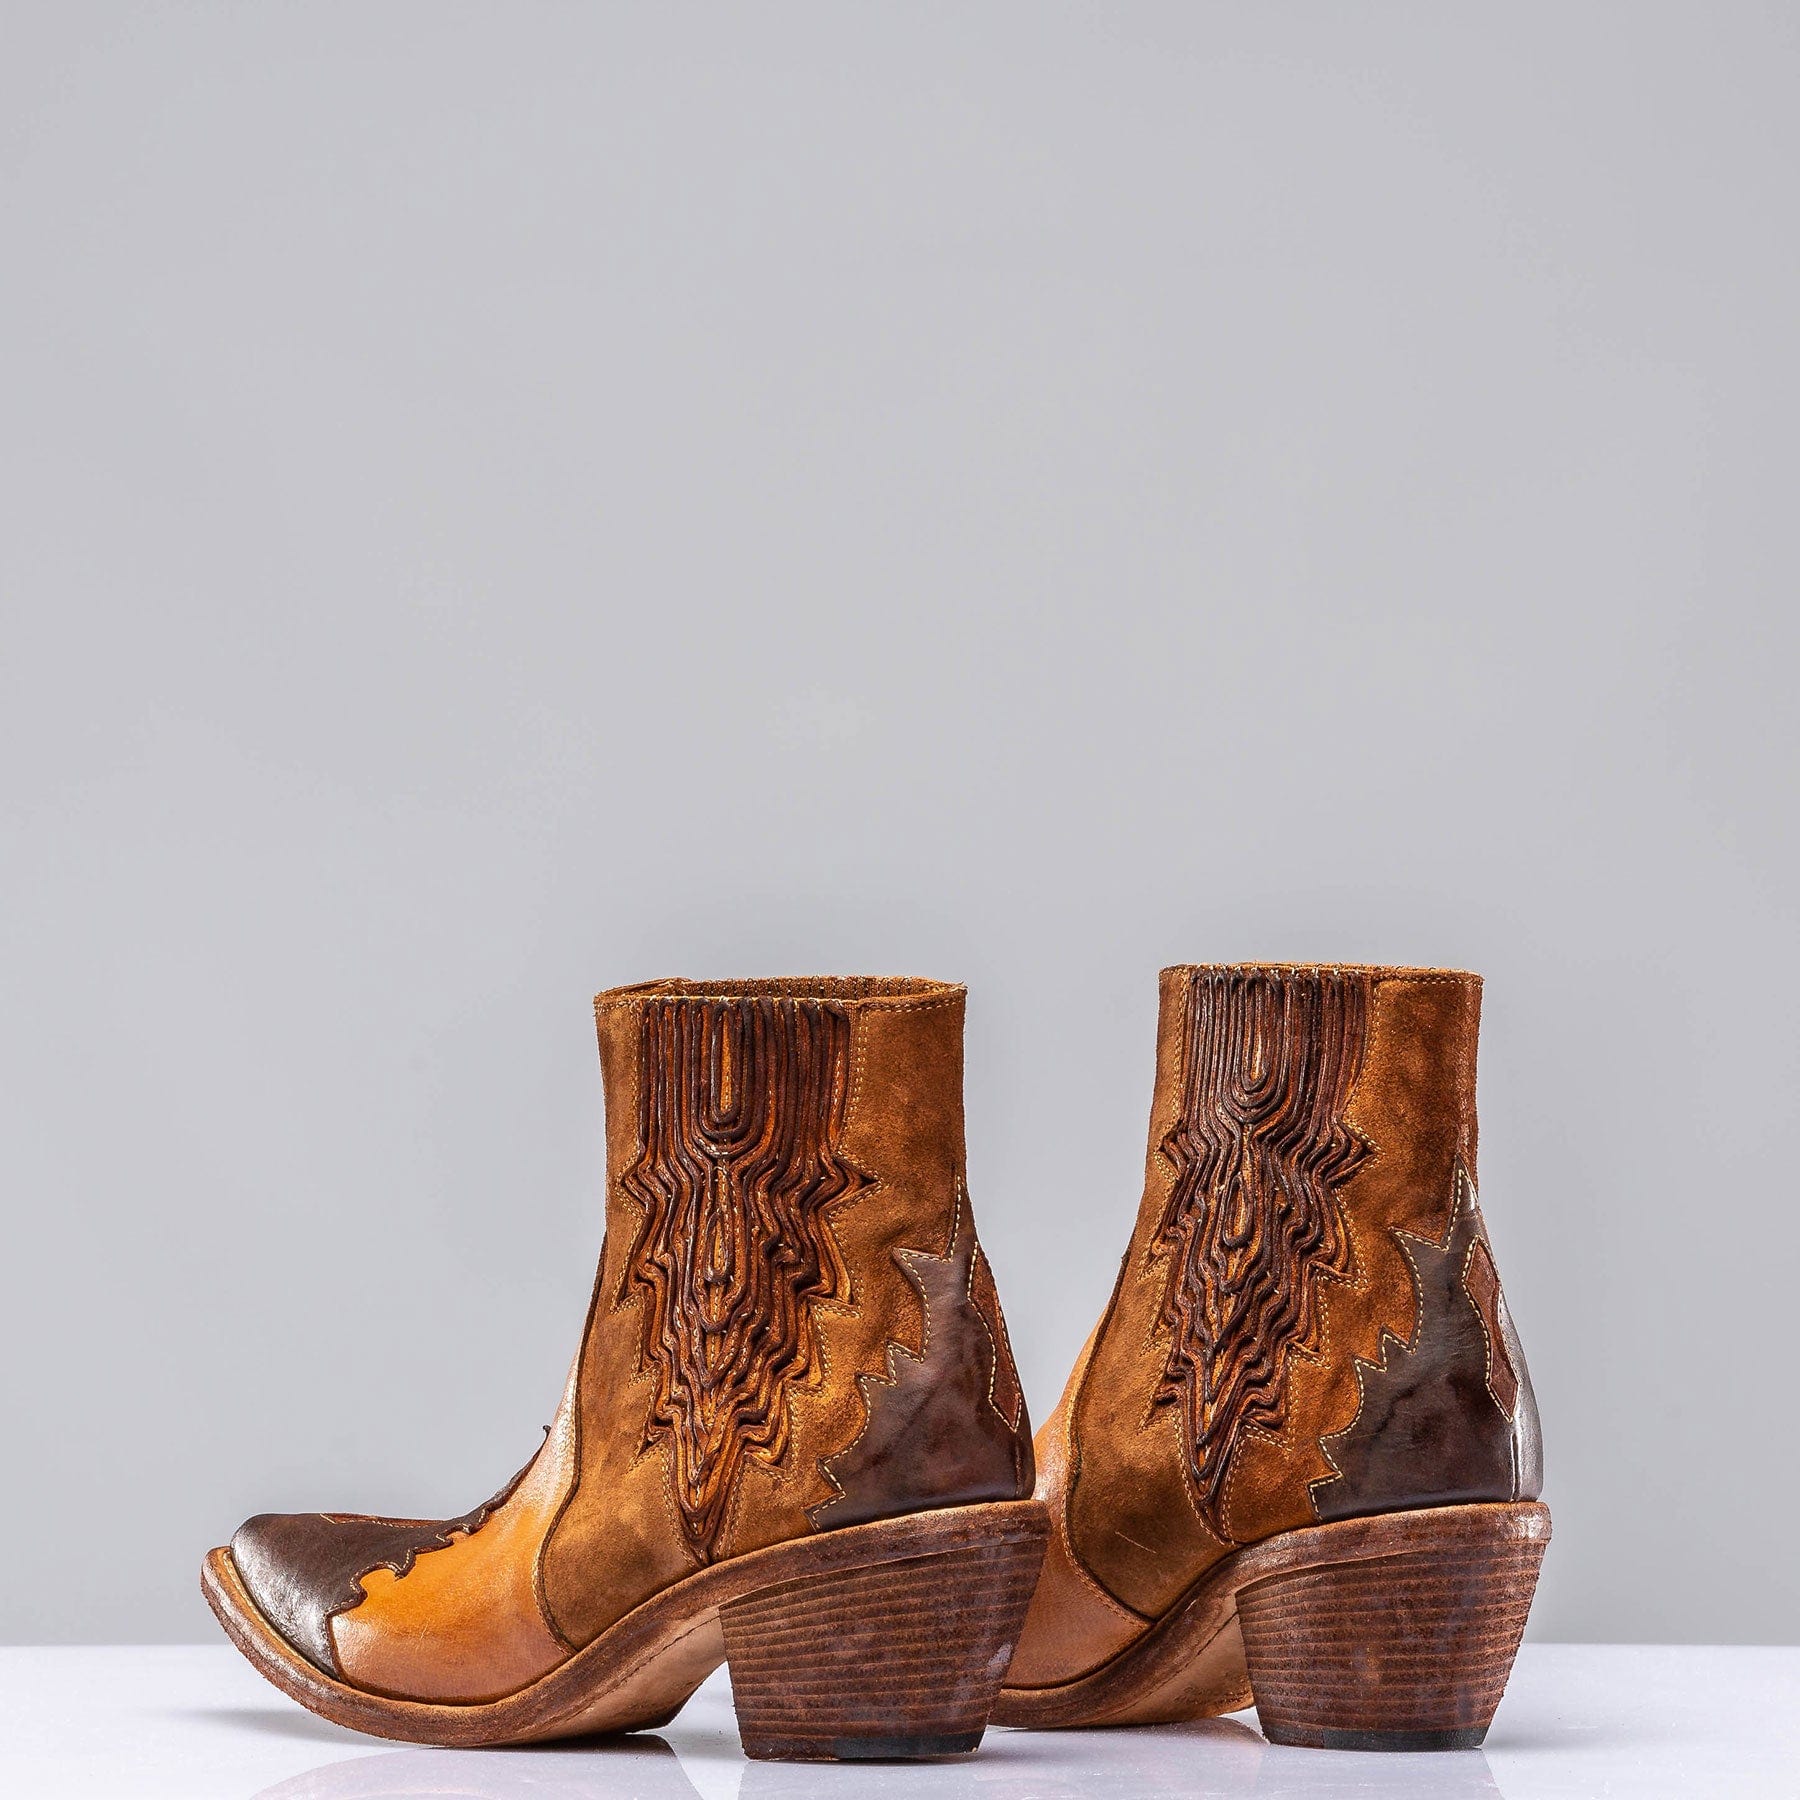 Luz Leather & Suede Boots In Palomino & Whiskey - AXEL'S